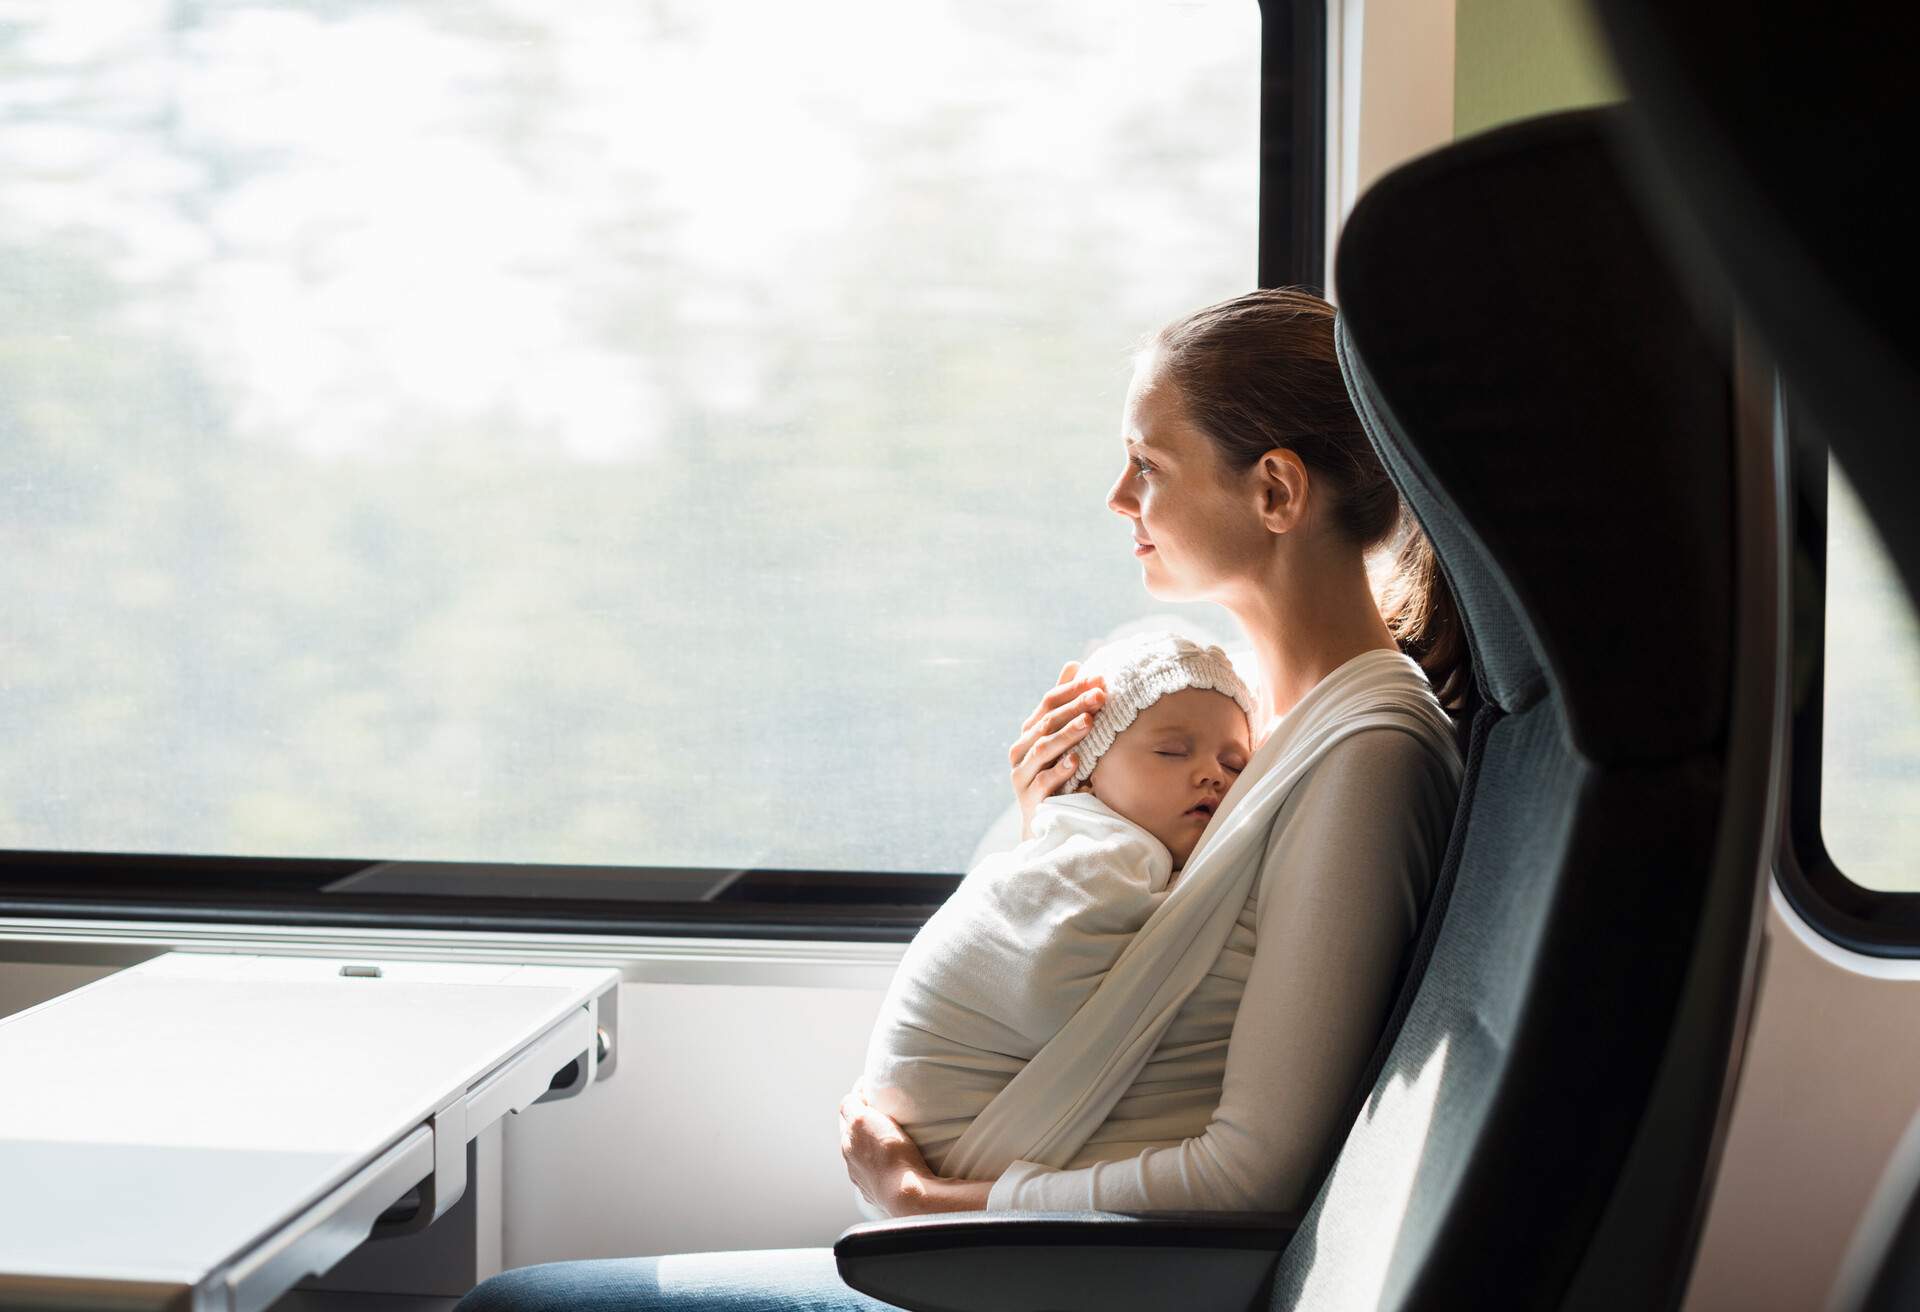 THEME_TRAIN_WOMAN_BABY_GettyImages-900243824